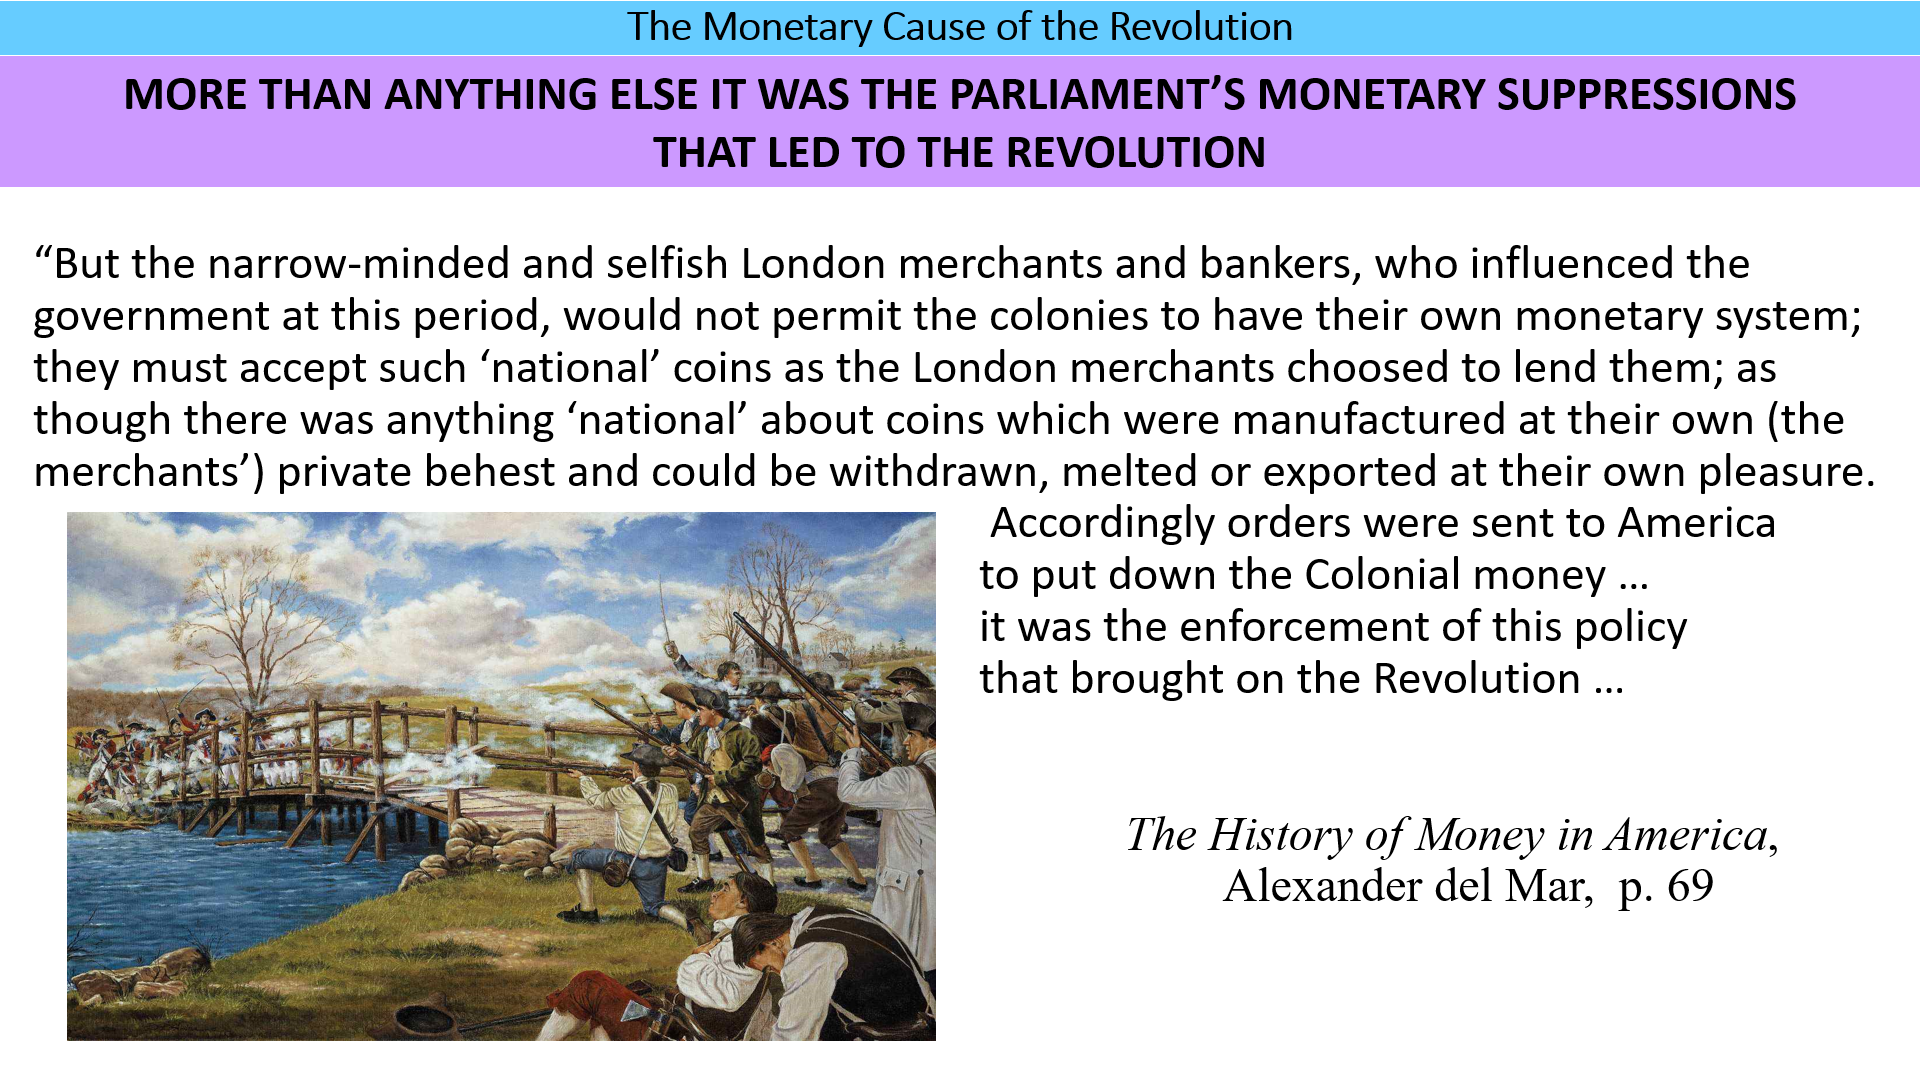 Part 6: Monetary cause of the revolution